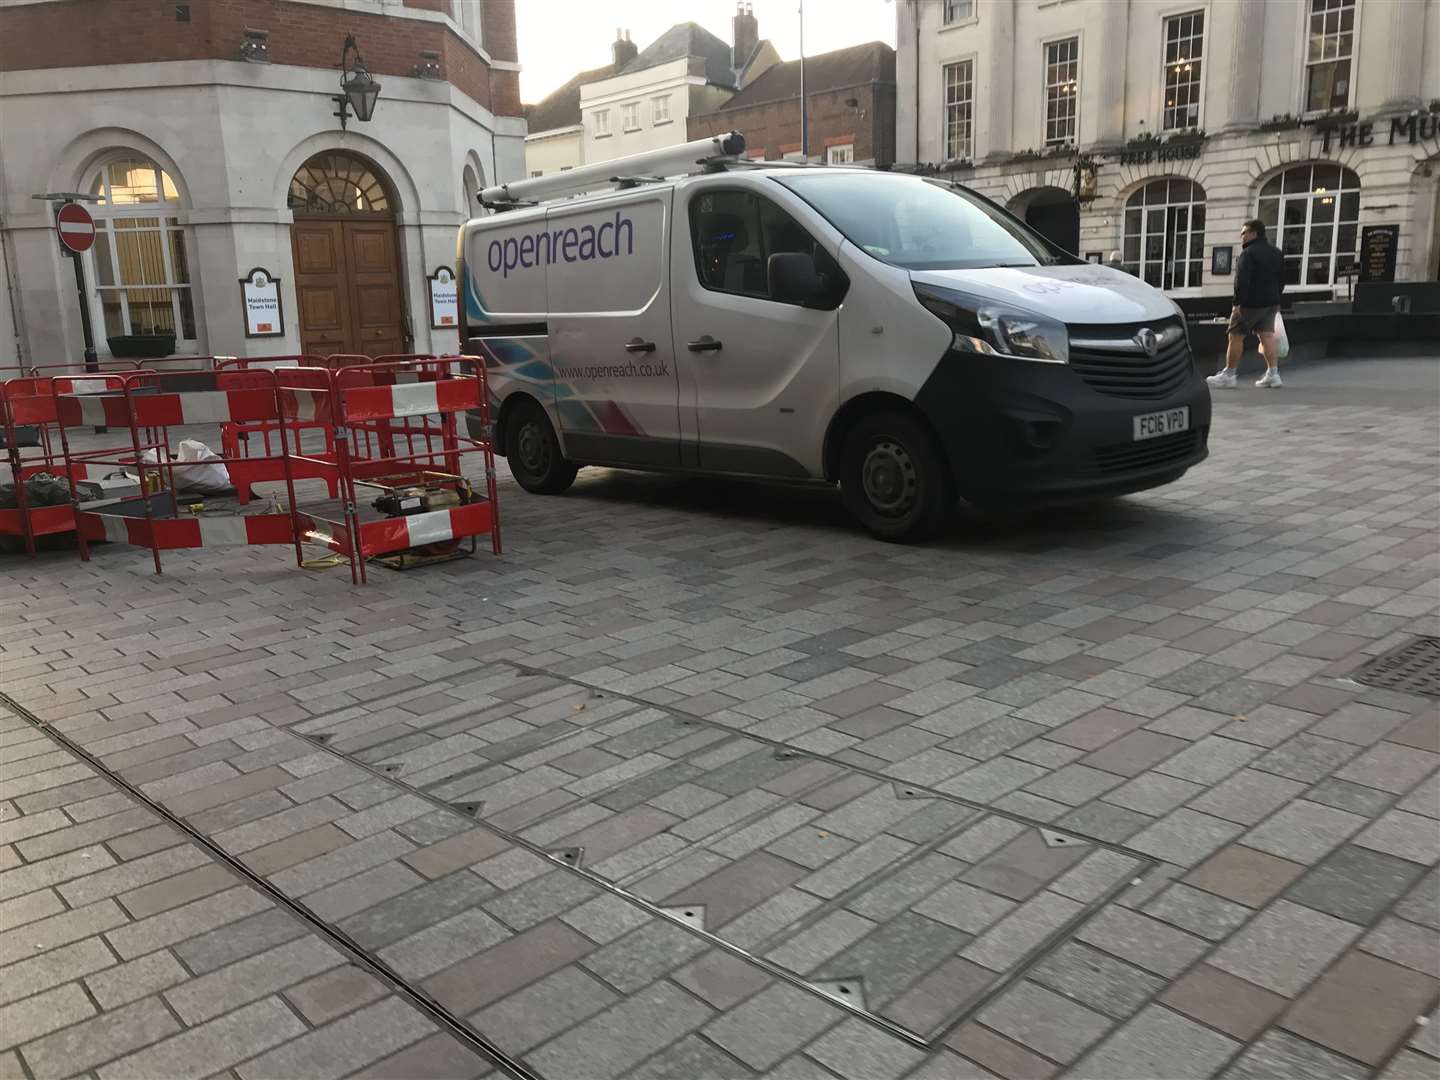 Openreach are in Jubilee Square repairing a faulty cable (19384831)